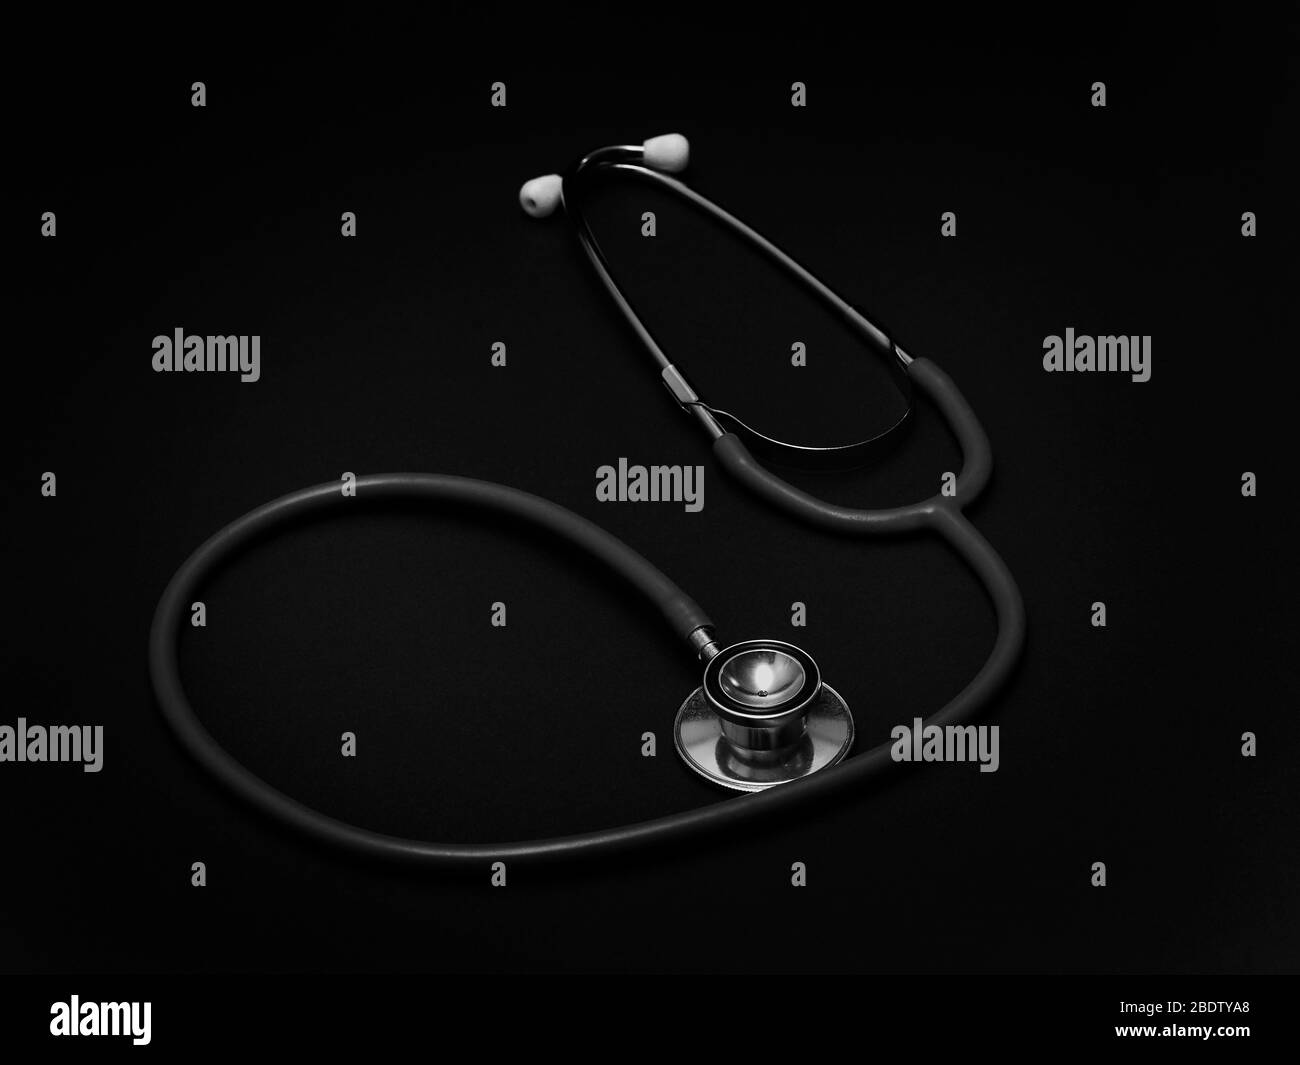 Stethoscope - a medical instrument for listening to the action of someone's heart or breathing, typically having a small disc-shaped resonator that is Stock Photo